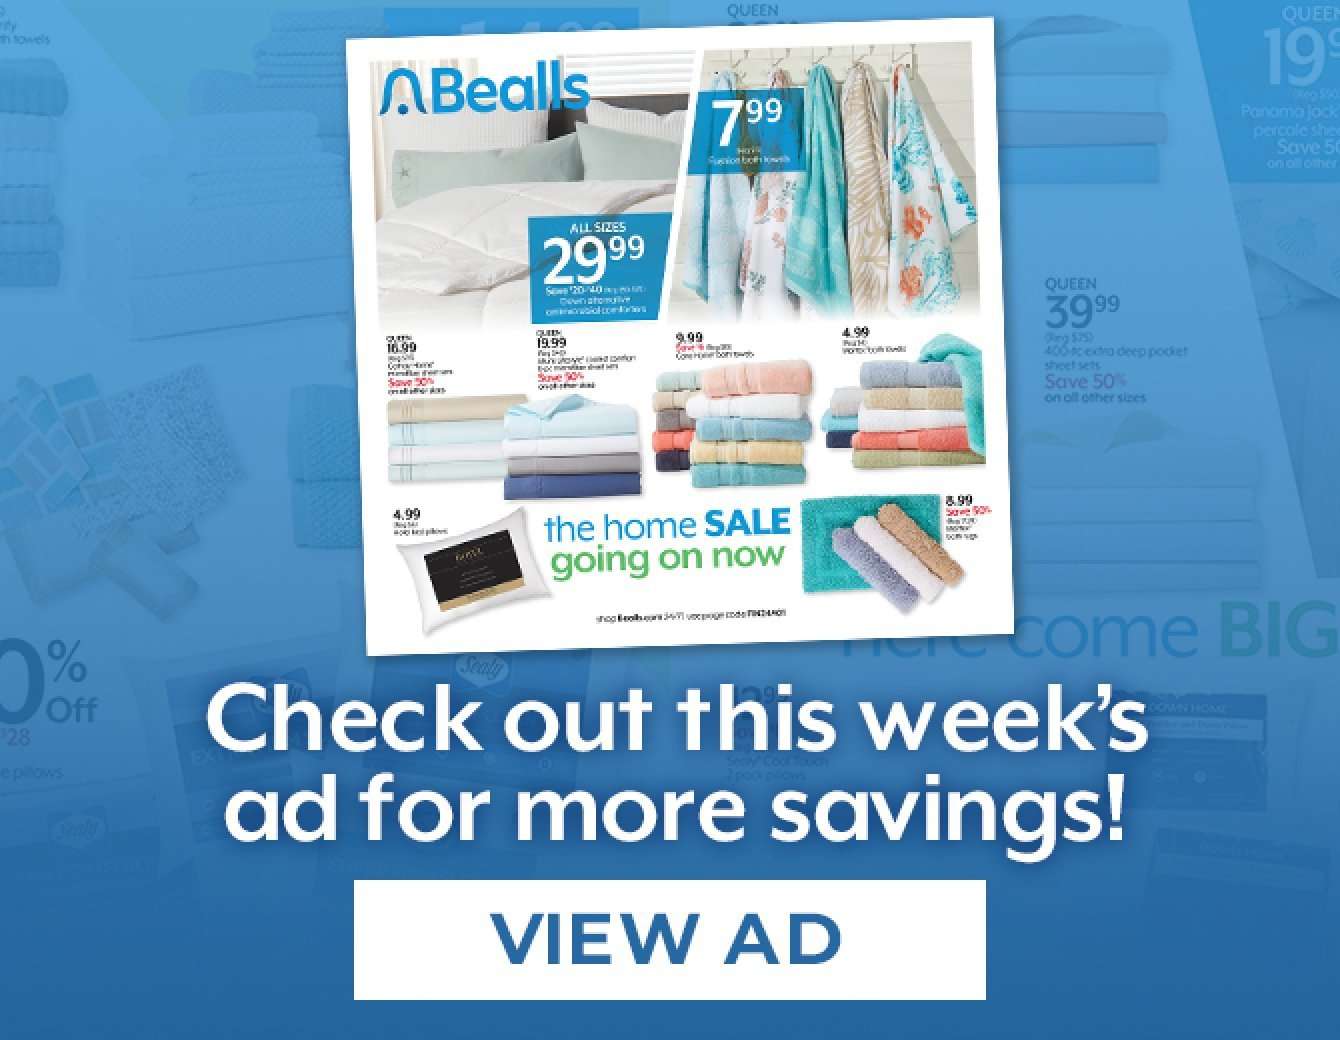 Check out this week's ad for more great deals!